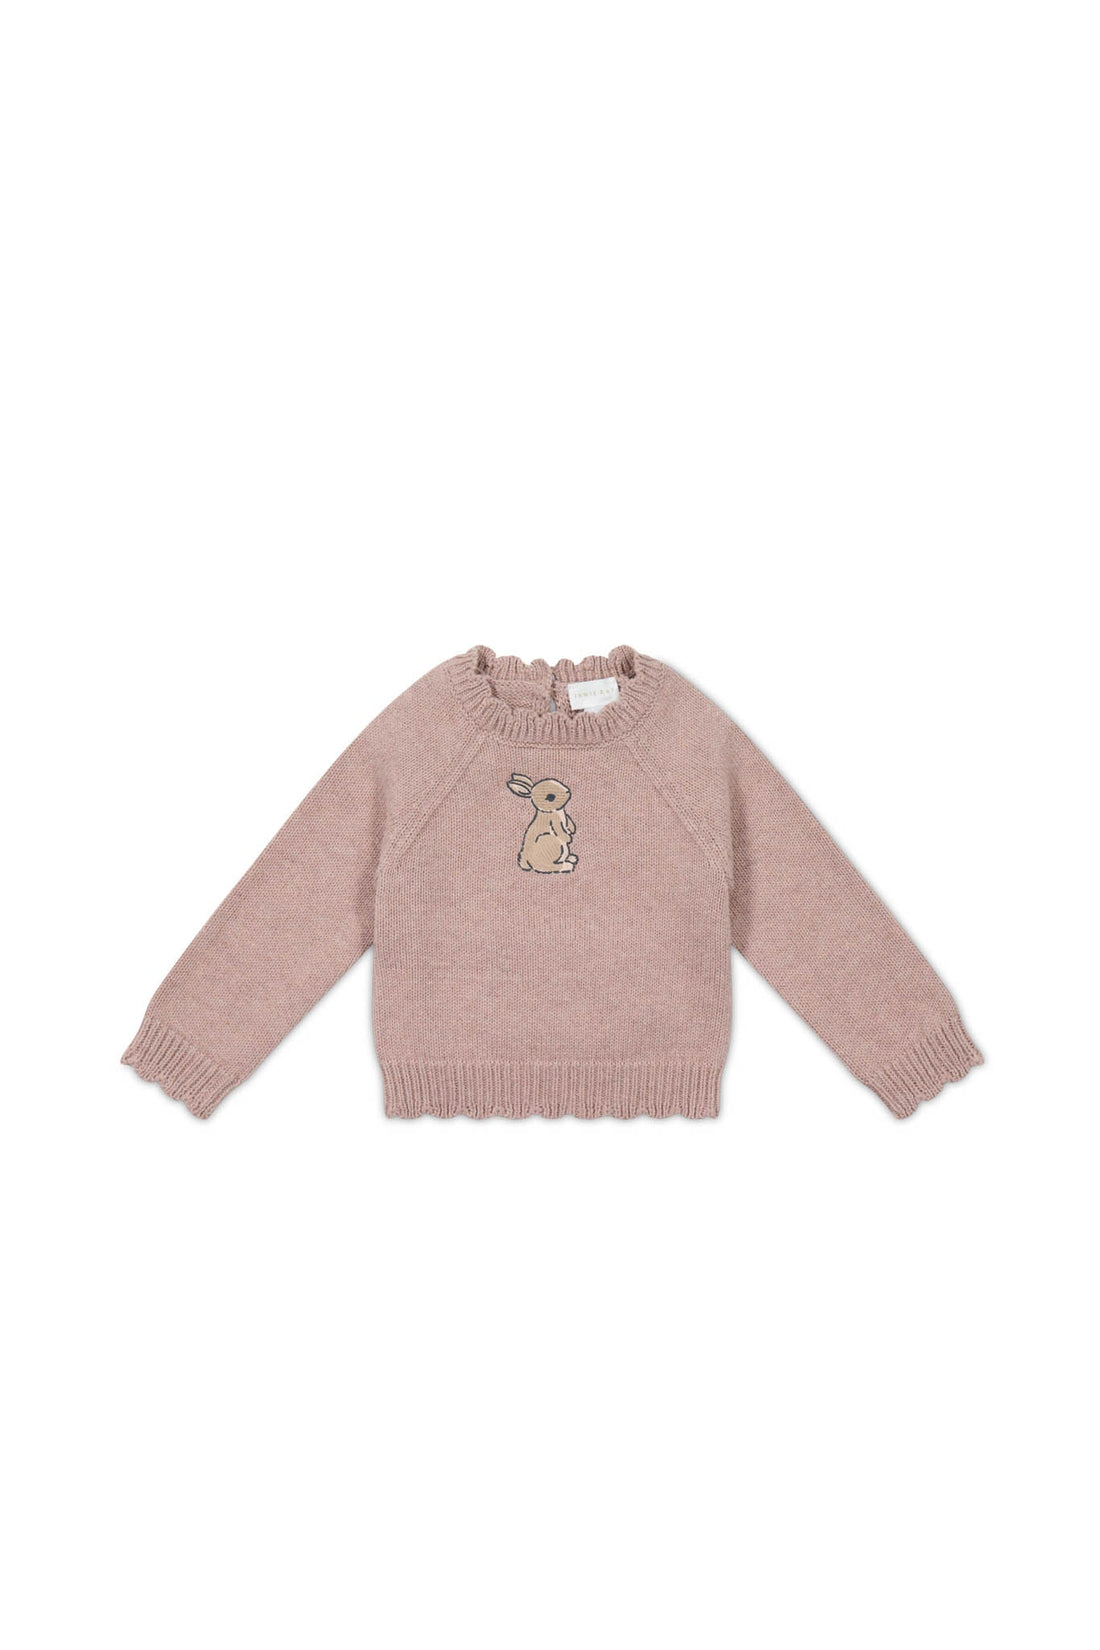 Audrey Knitted Jumper - Shell Marle Childrens Knitwear from Jamie Kay USA